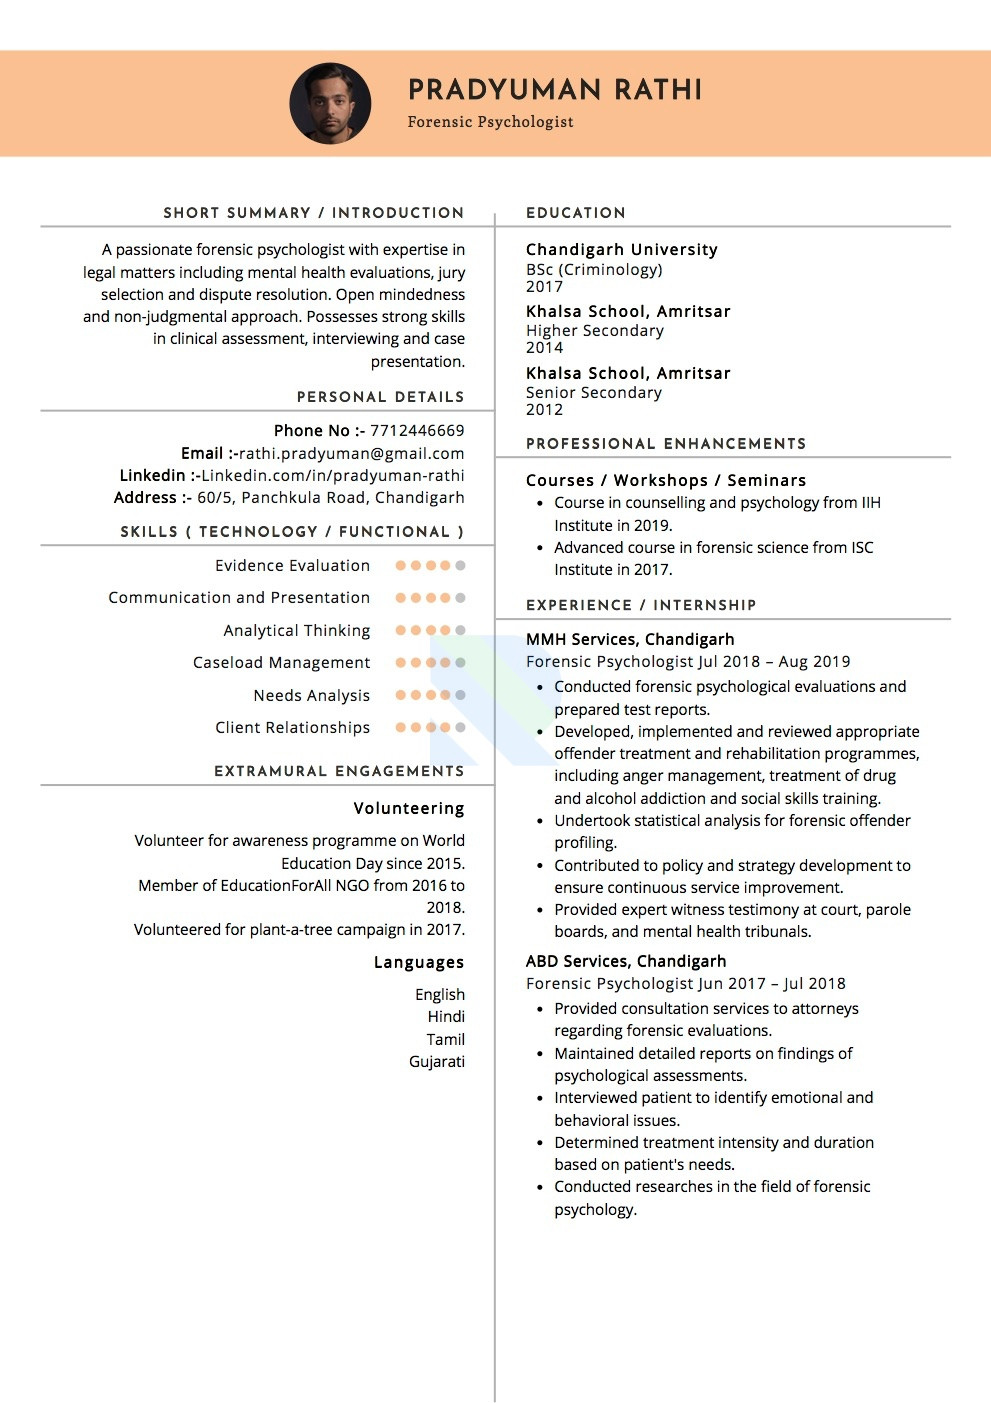 Resume Samples for Conducting Psychology Tests Sample Resumes and Cvs by Industry Resumod